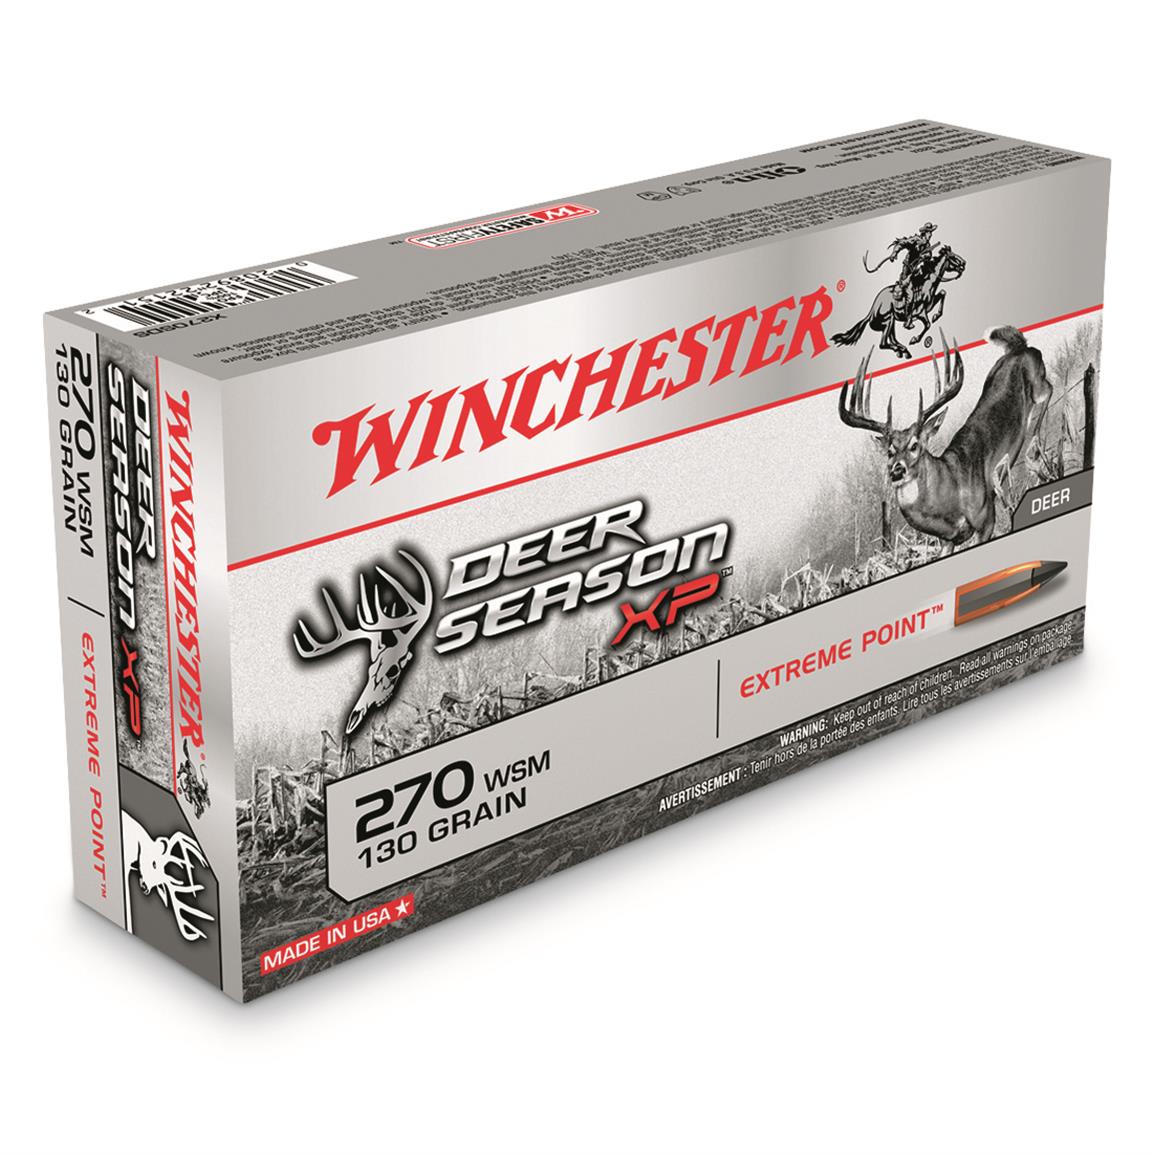 Winchester Deer Season XP, .270 WSM, Polymer-Tipped Extreme Point, 130 Grain, 20 Rounds